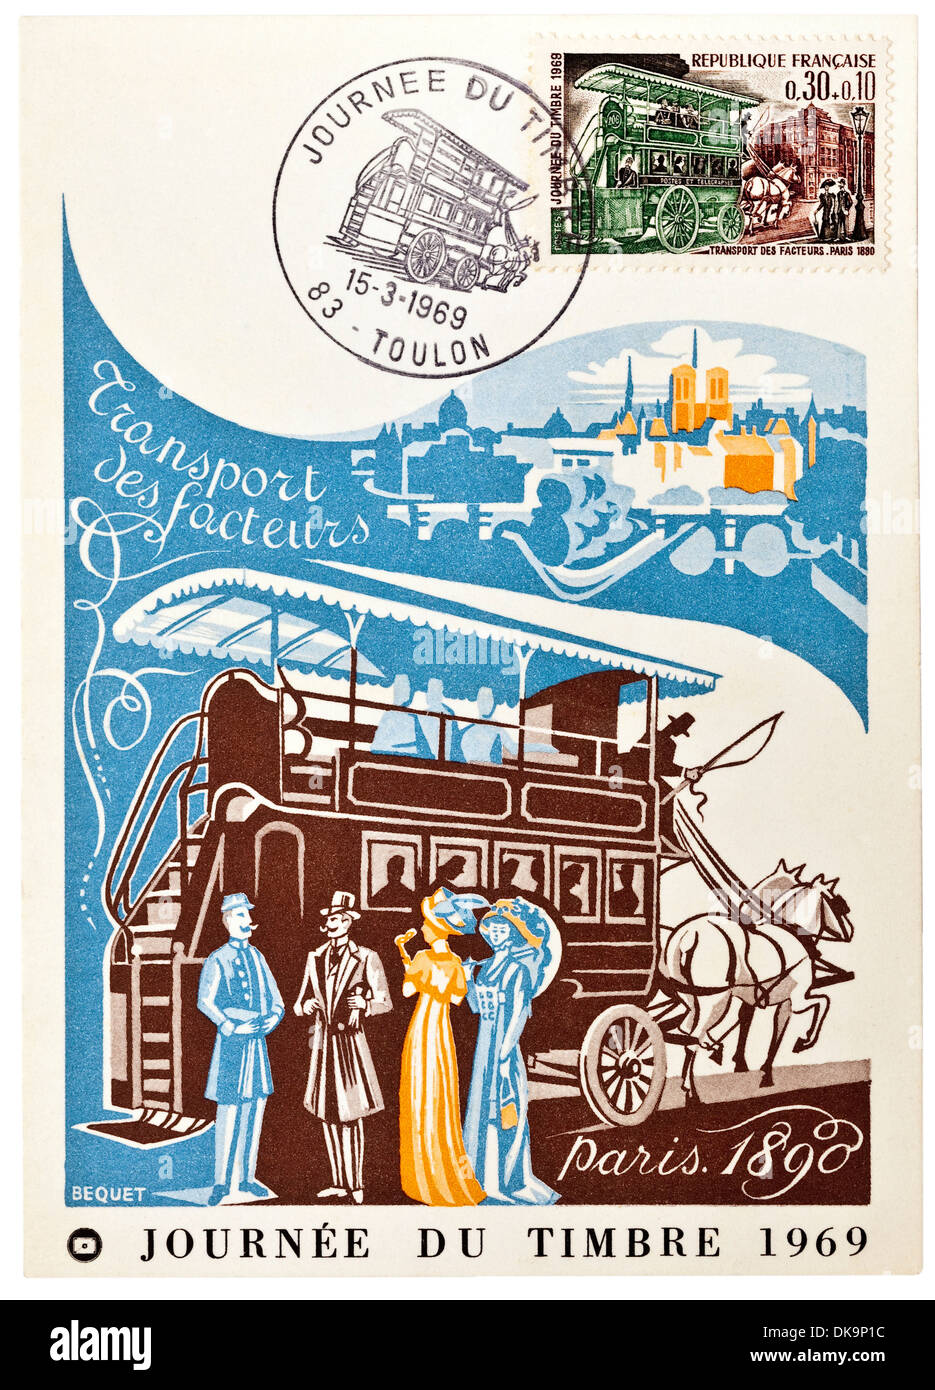 1969 French postcard depicting horse-drawn post bus in Paris 1890 - "Journée du Timbre" (Stamp Day). Stock Photo